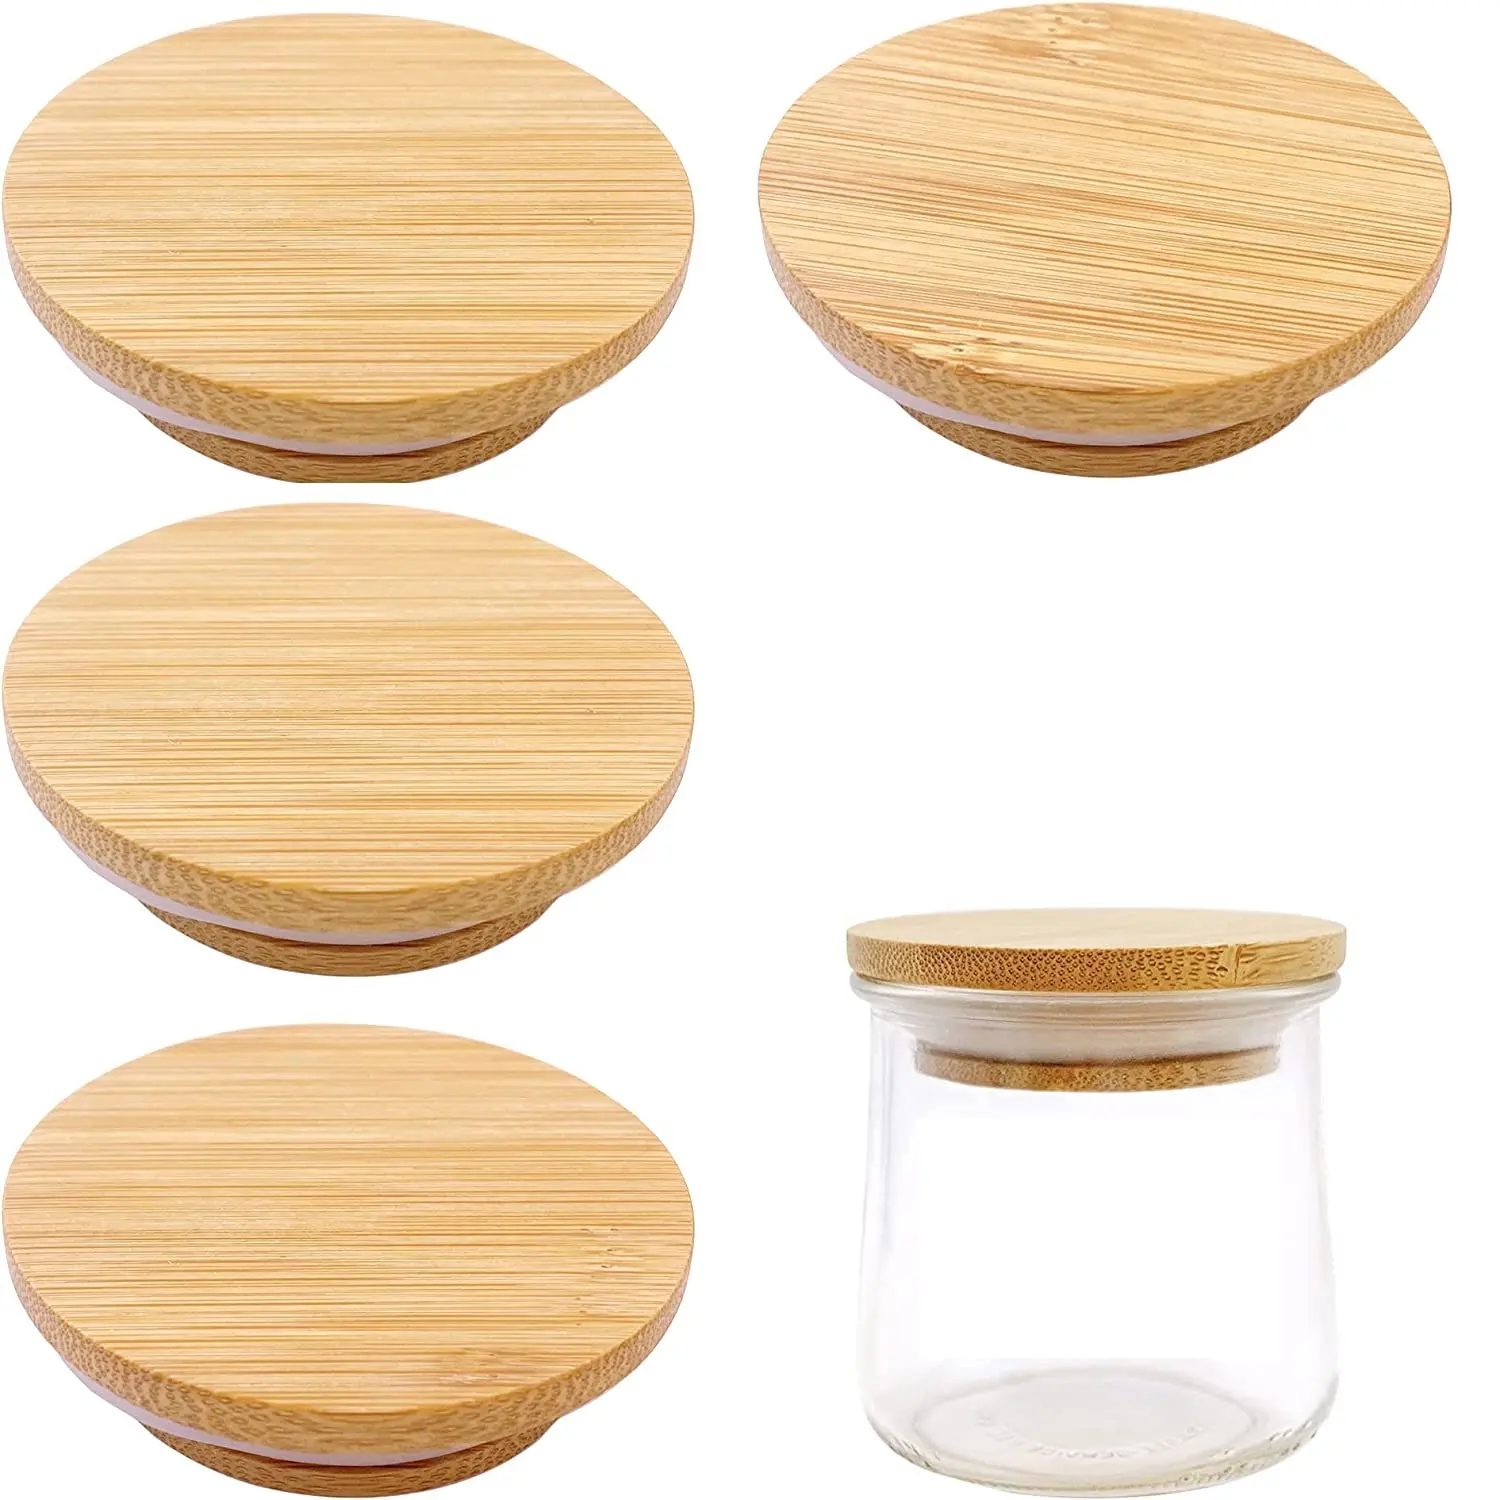 manufacture Bamboo mason jar lid storage canning lids with silica gel sealing ring wooden cover for glass container candle jar and mugs